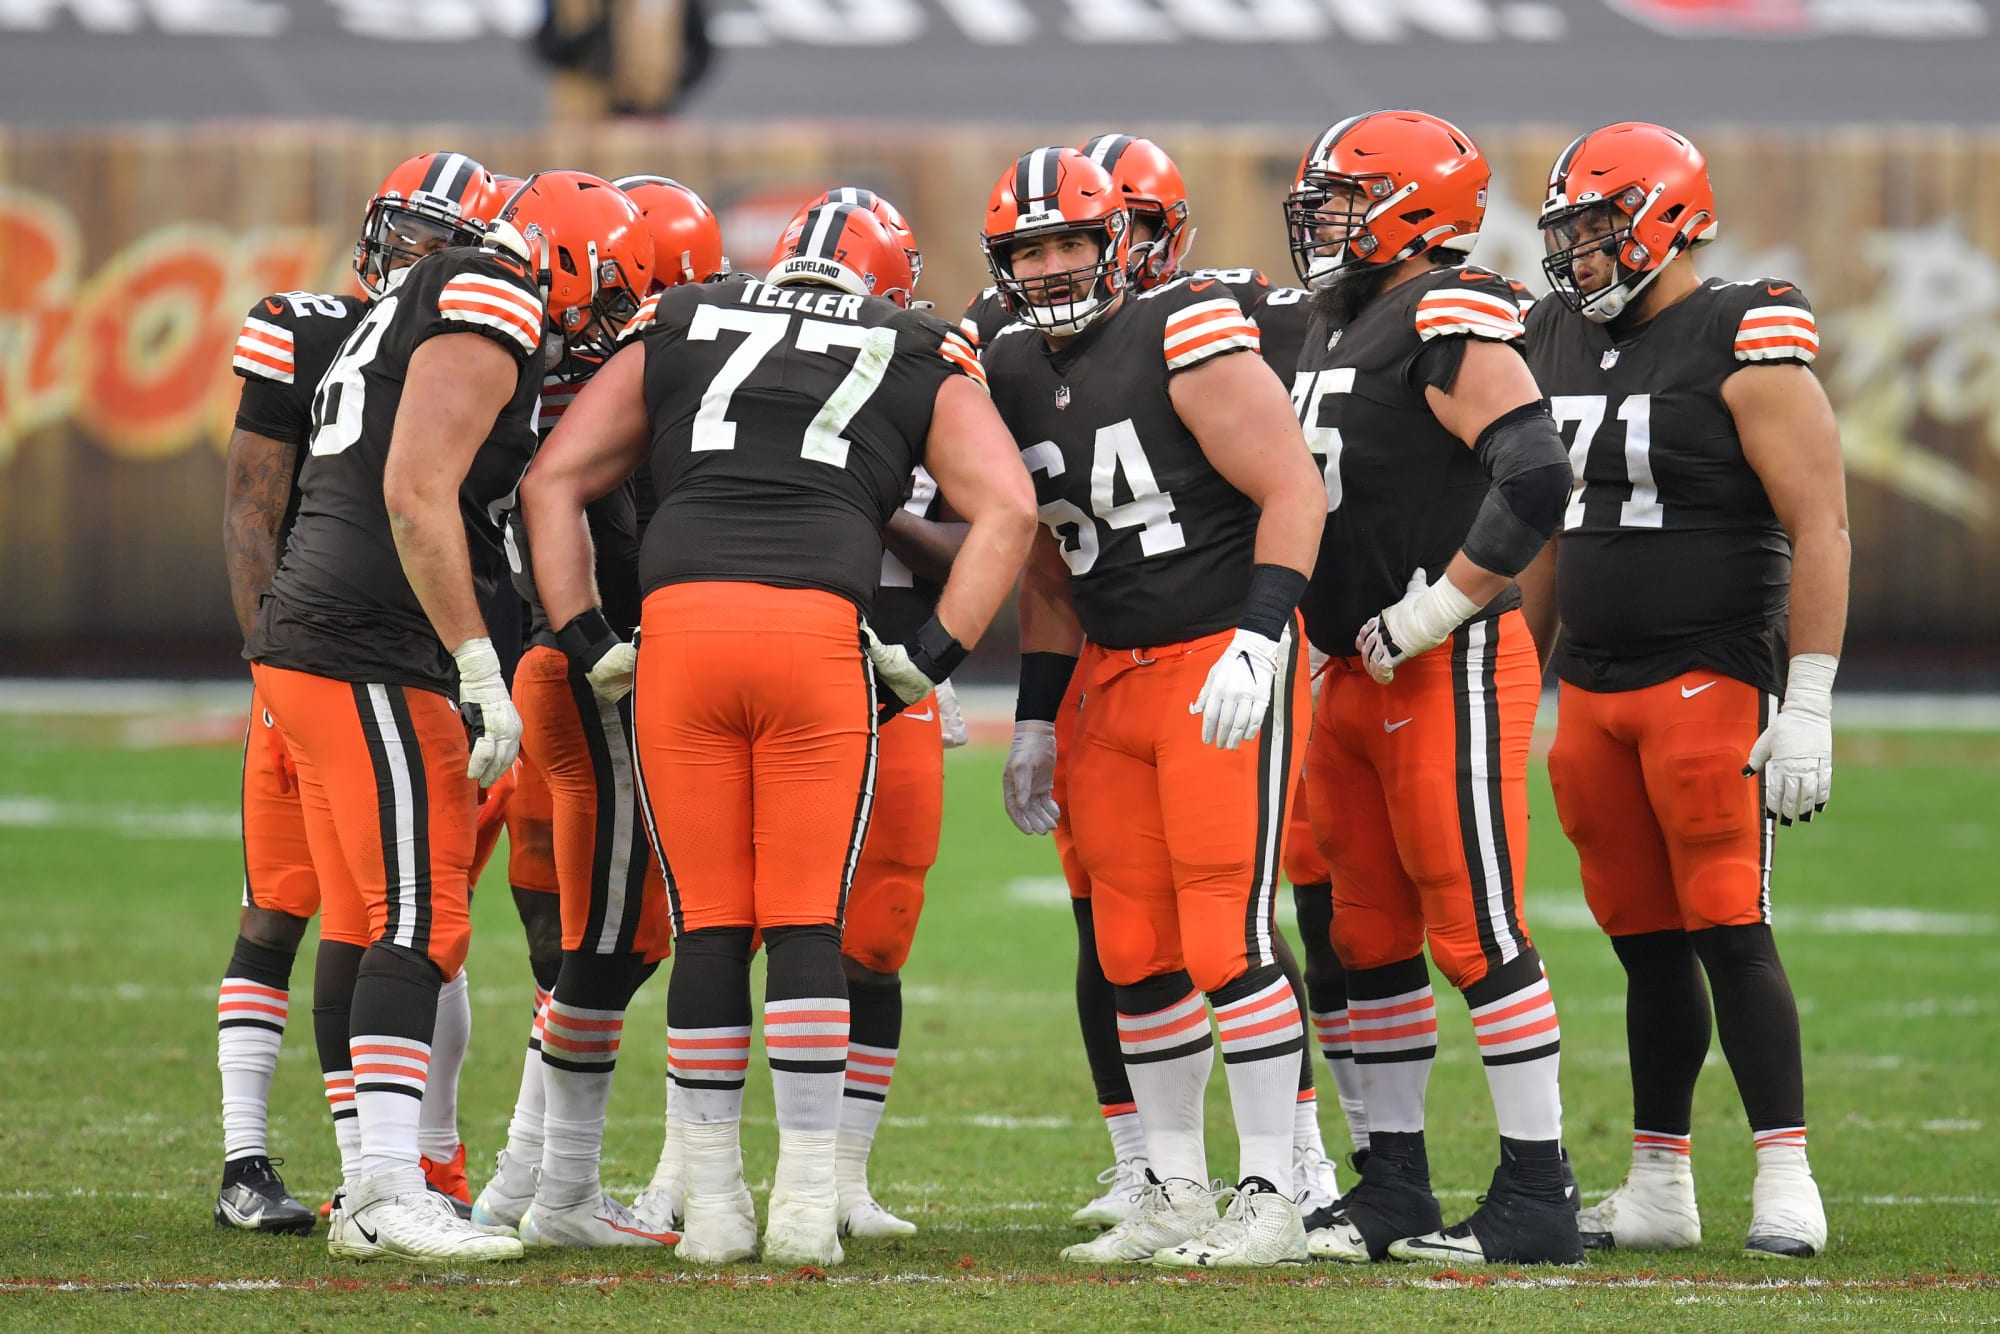 Browns With salary cap going up in 2022, team should spend now